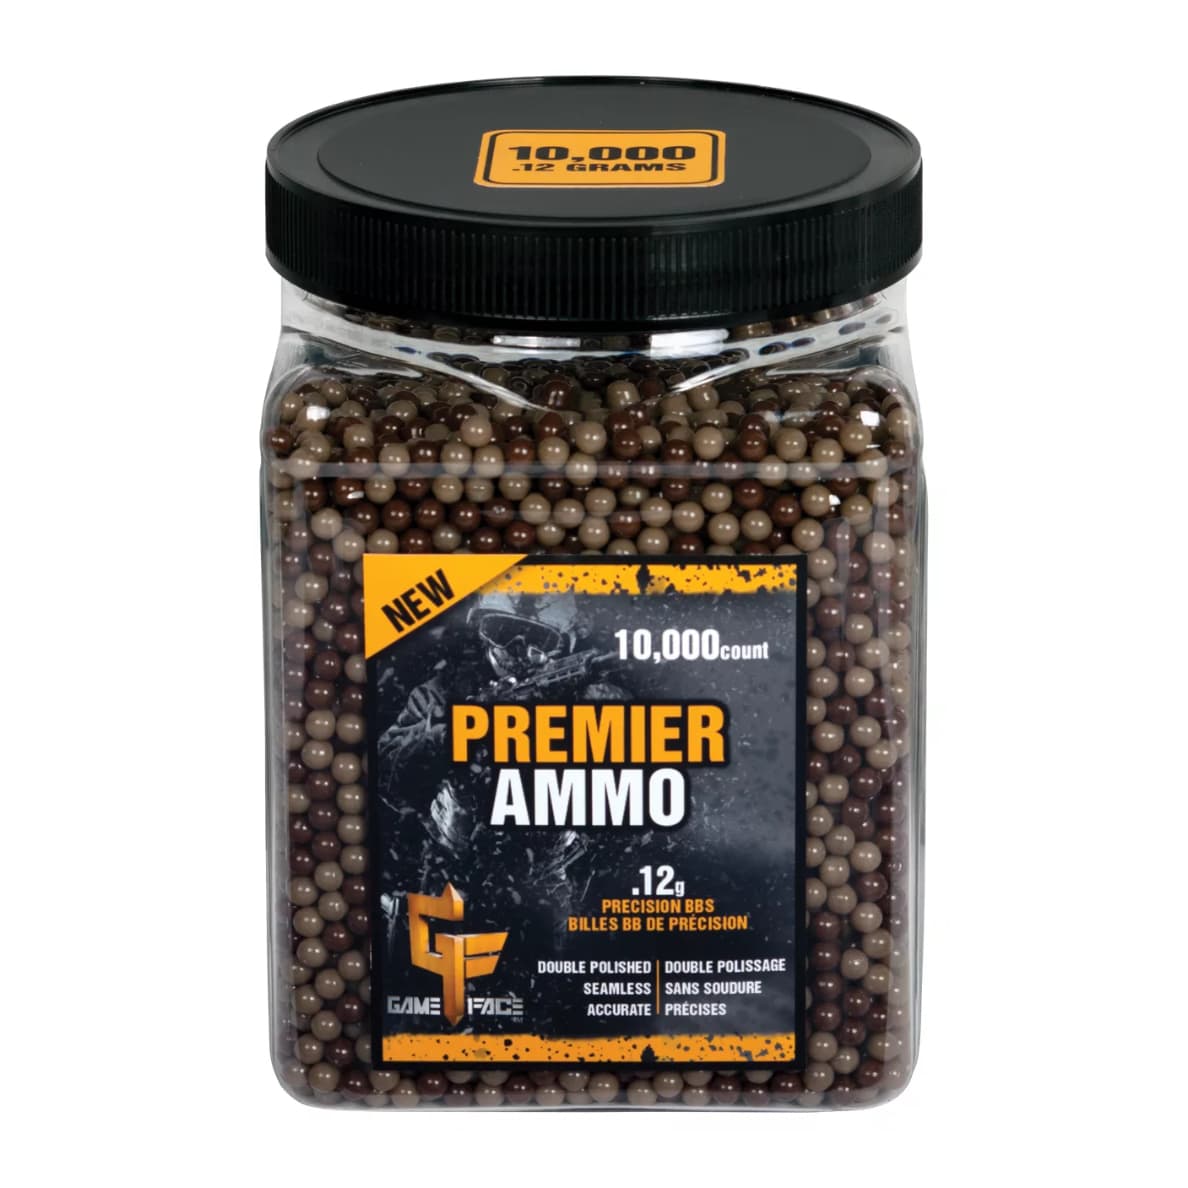 GameFace™ Premier Camo Airsoft Ammo